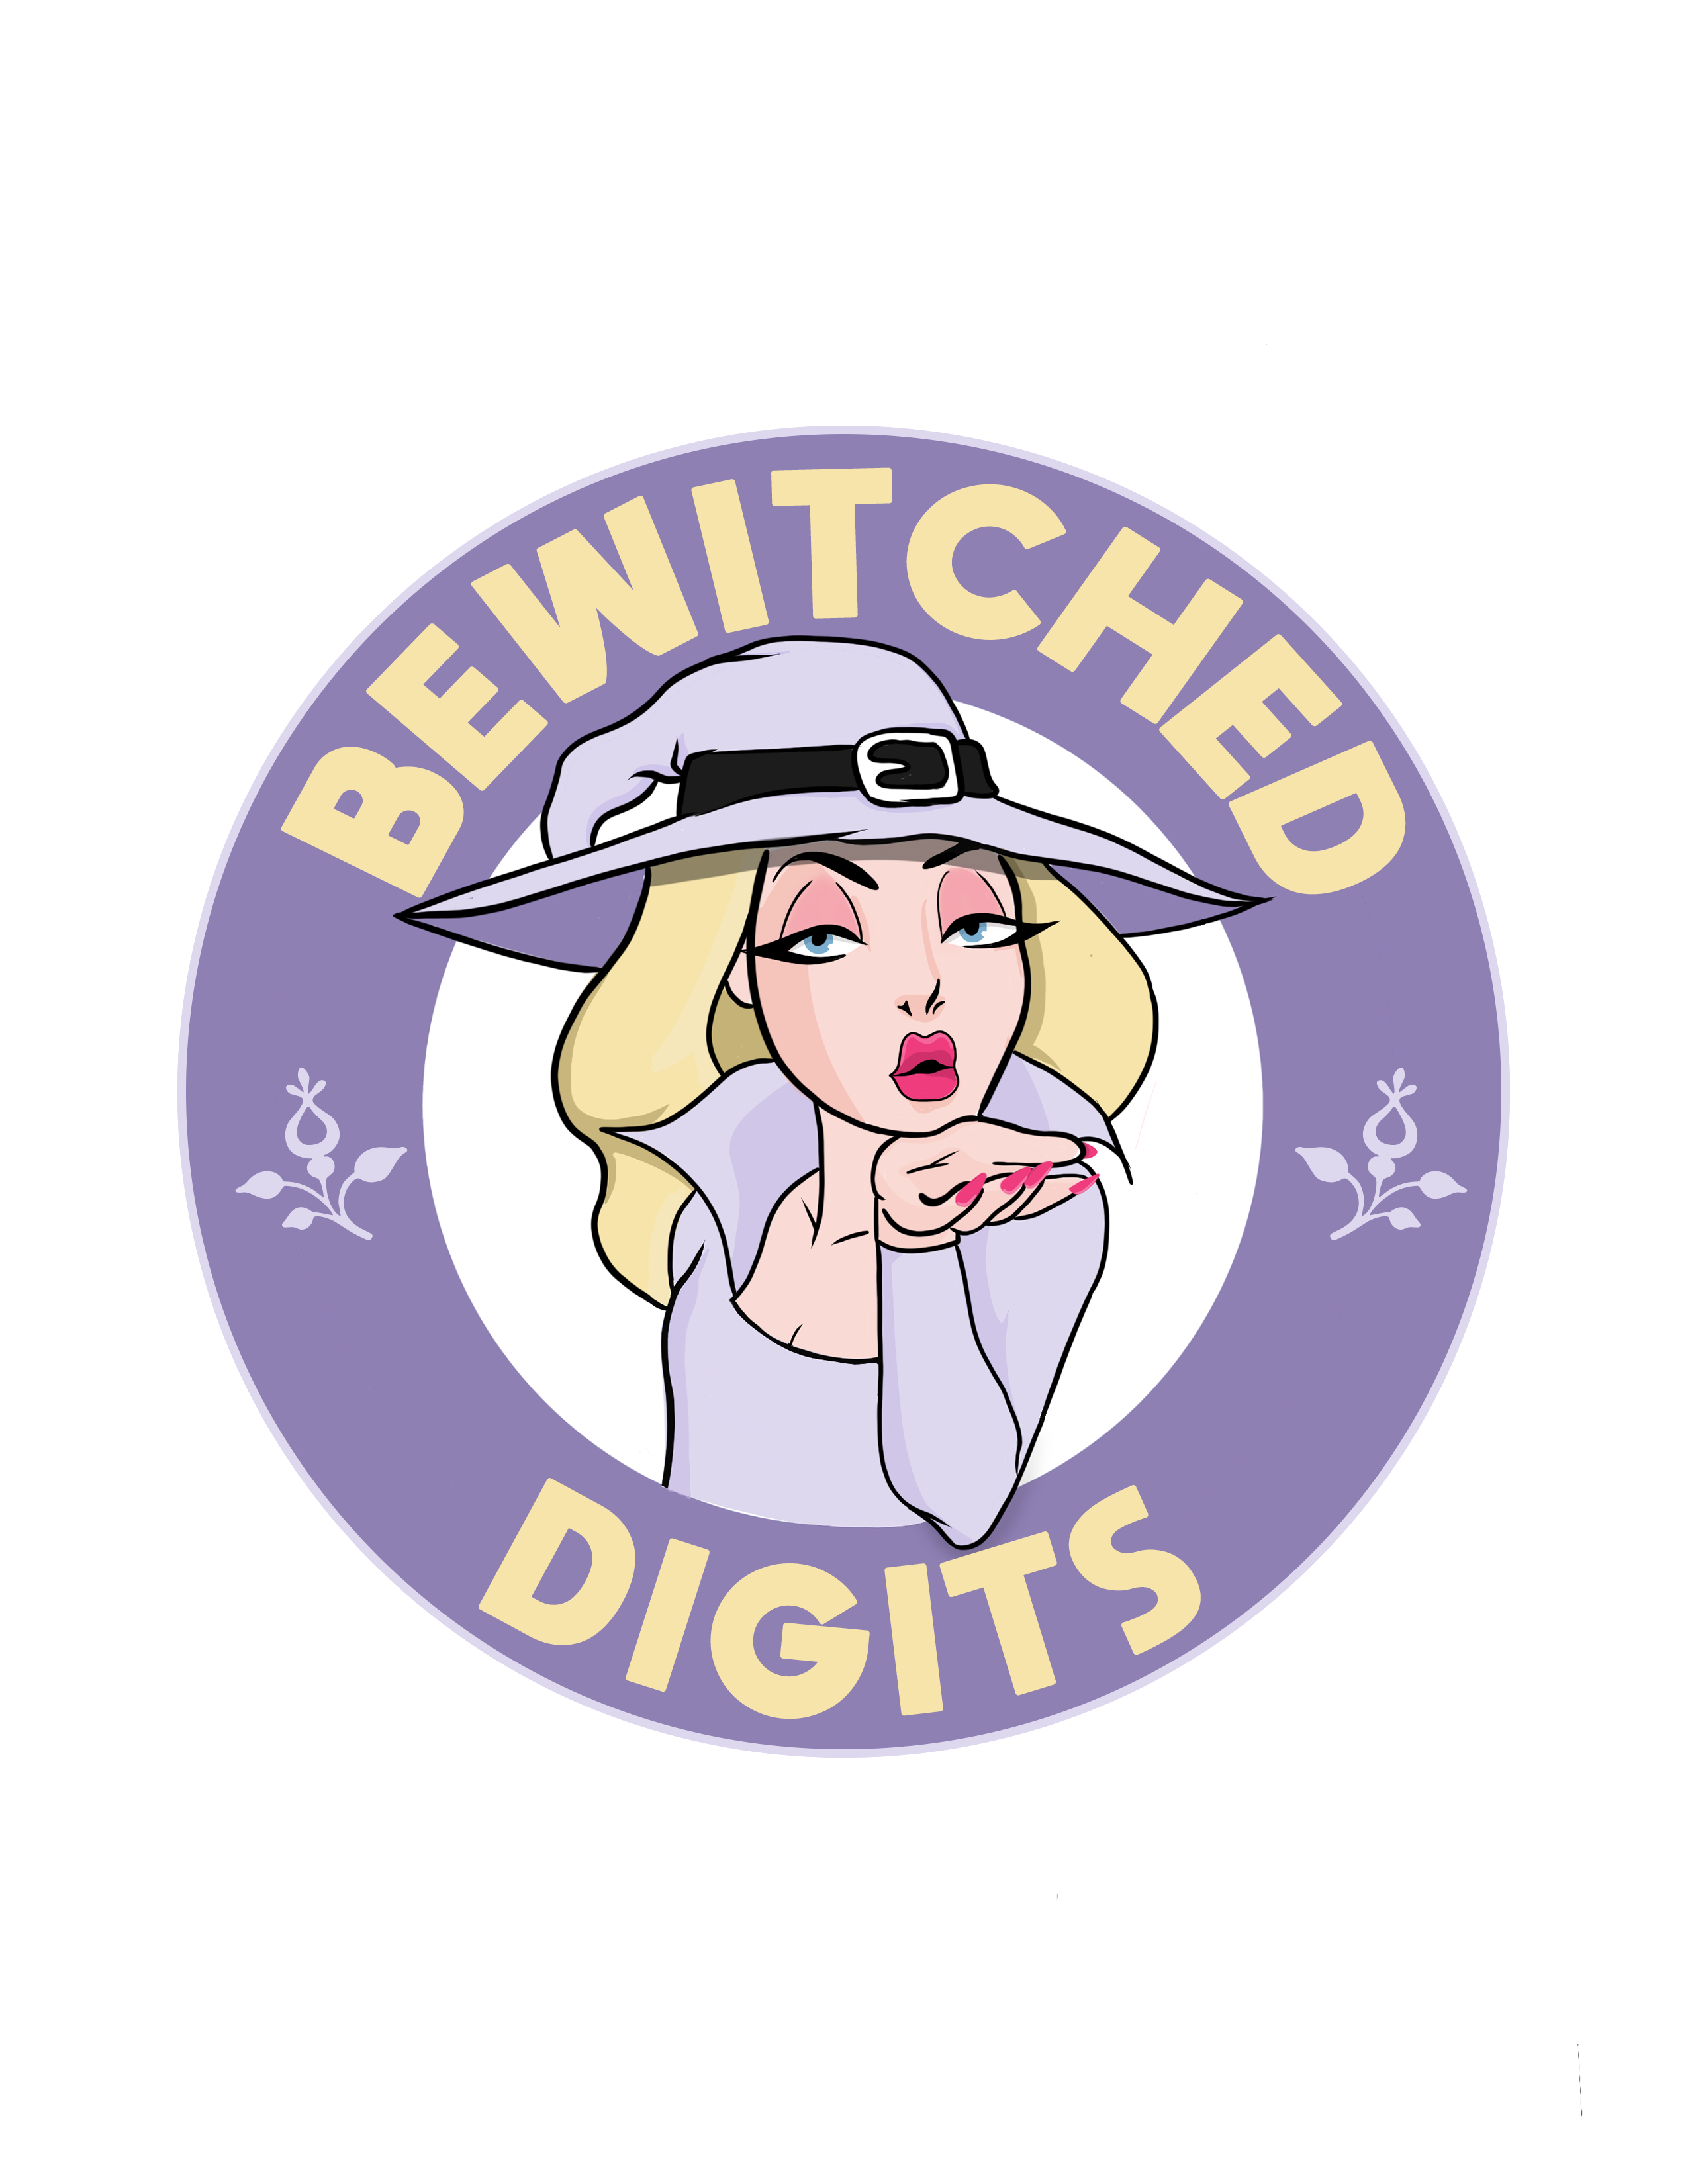 Bewitched Digits Nail Wraps Coupon Codes